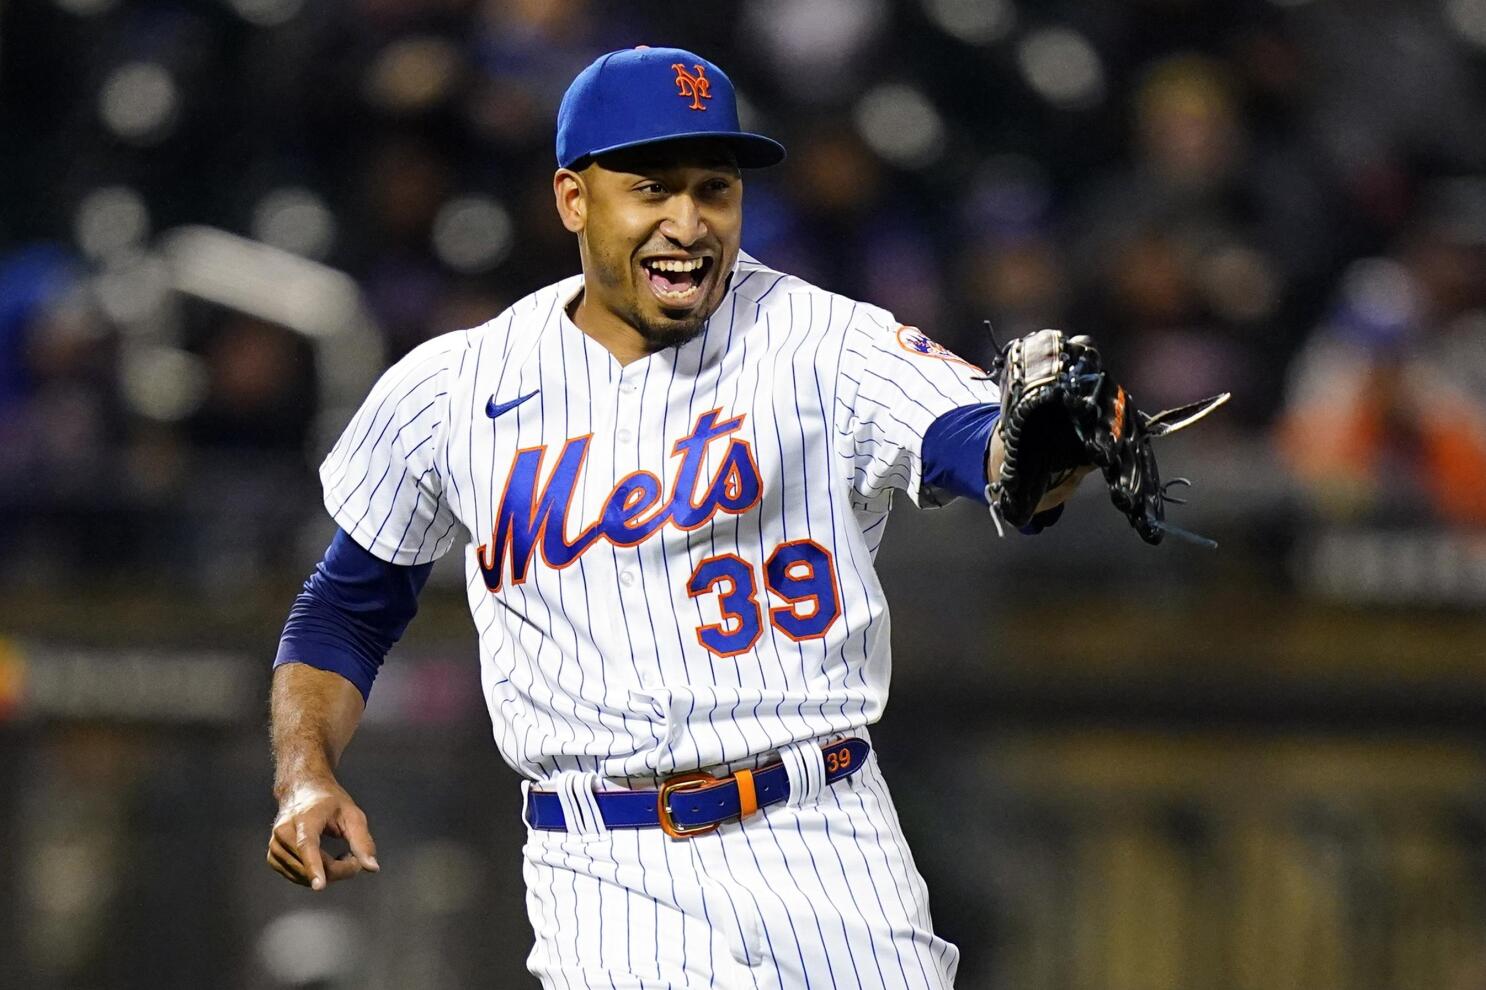 New York Mets to make deferred payments to Edwin Diaz until 2042